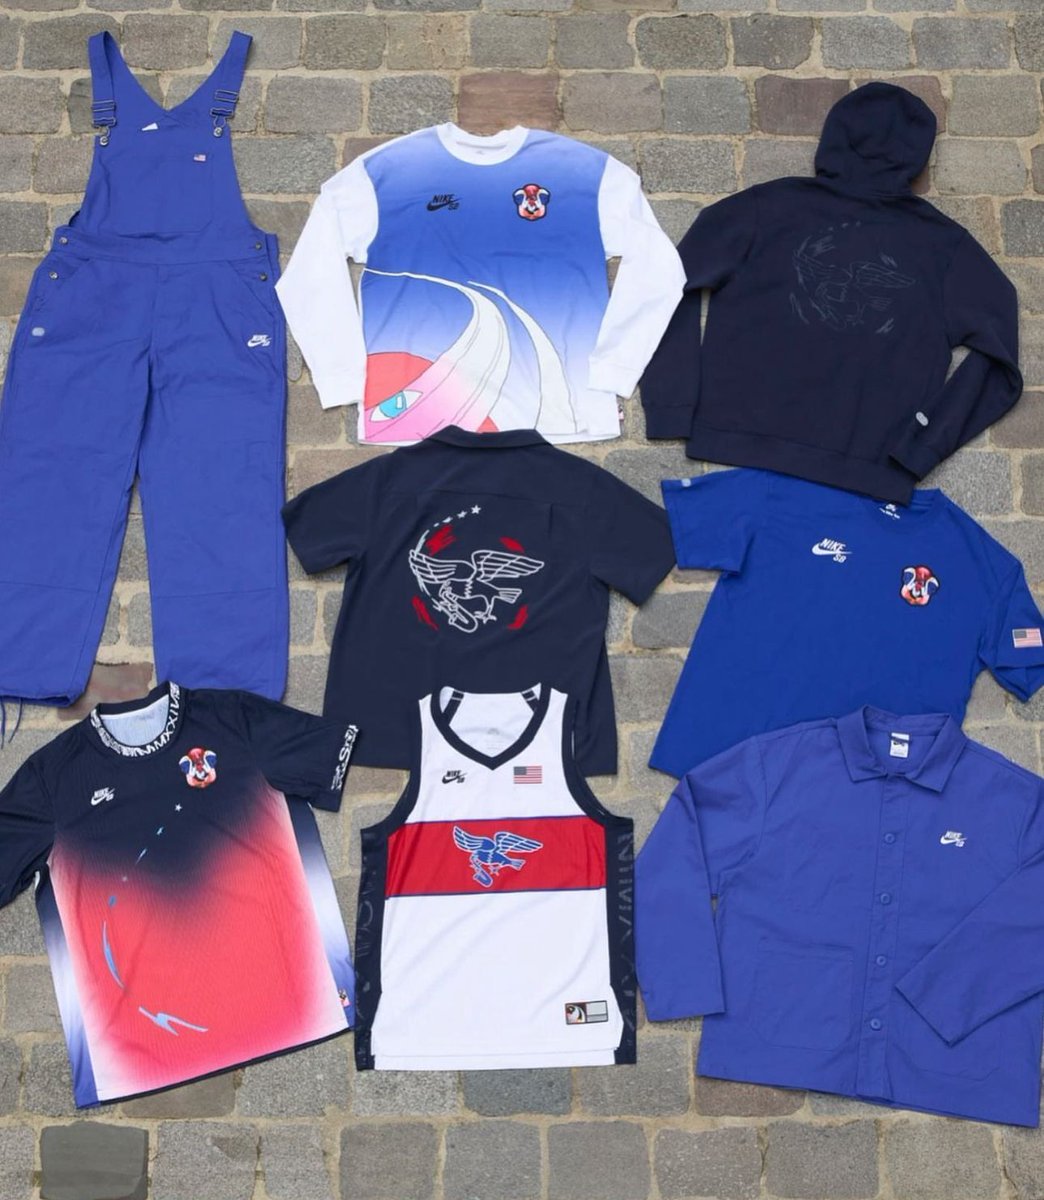 Team USA’s Nike SB’s uniform & kit for the upcoming Summer 2024 Paris Olympic Games 🛹